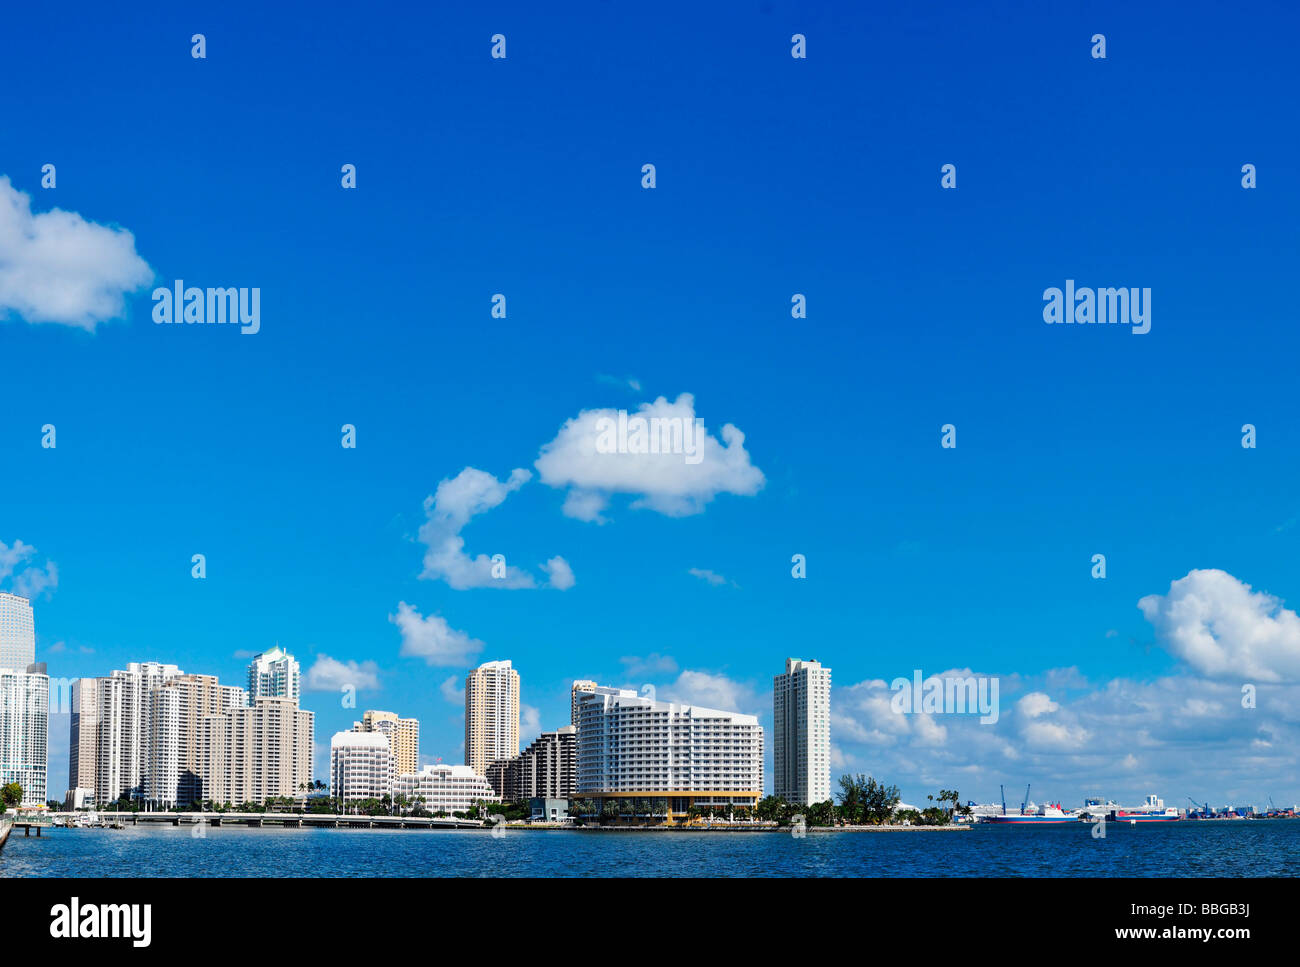 Skyline view of the southern tip of Brickell Island in Miami, Florida, USA Stock Photo